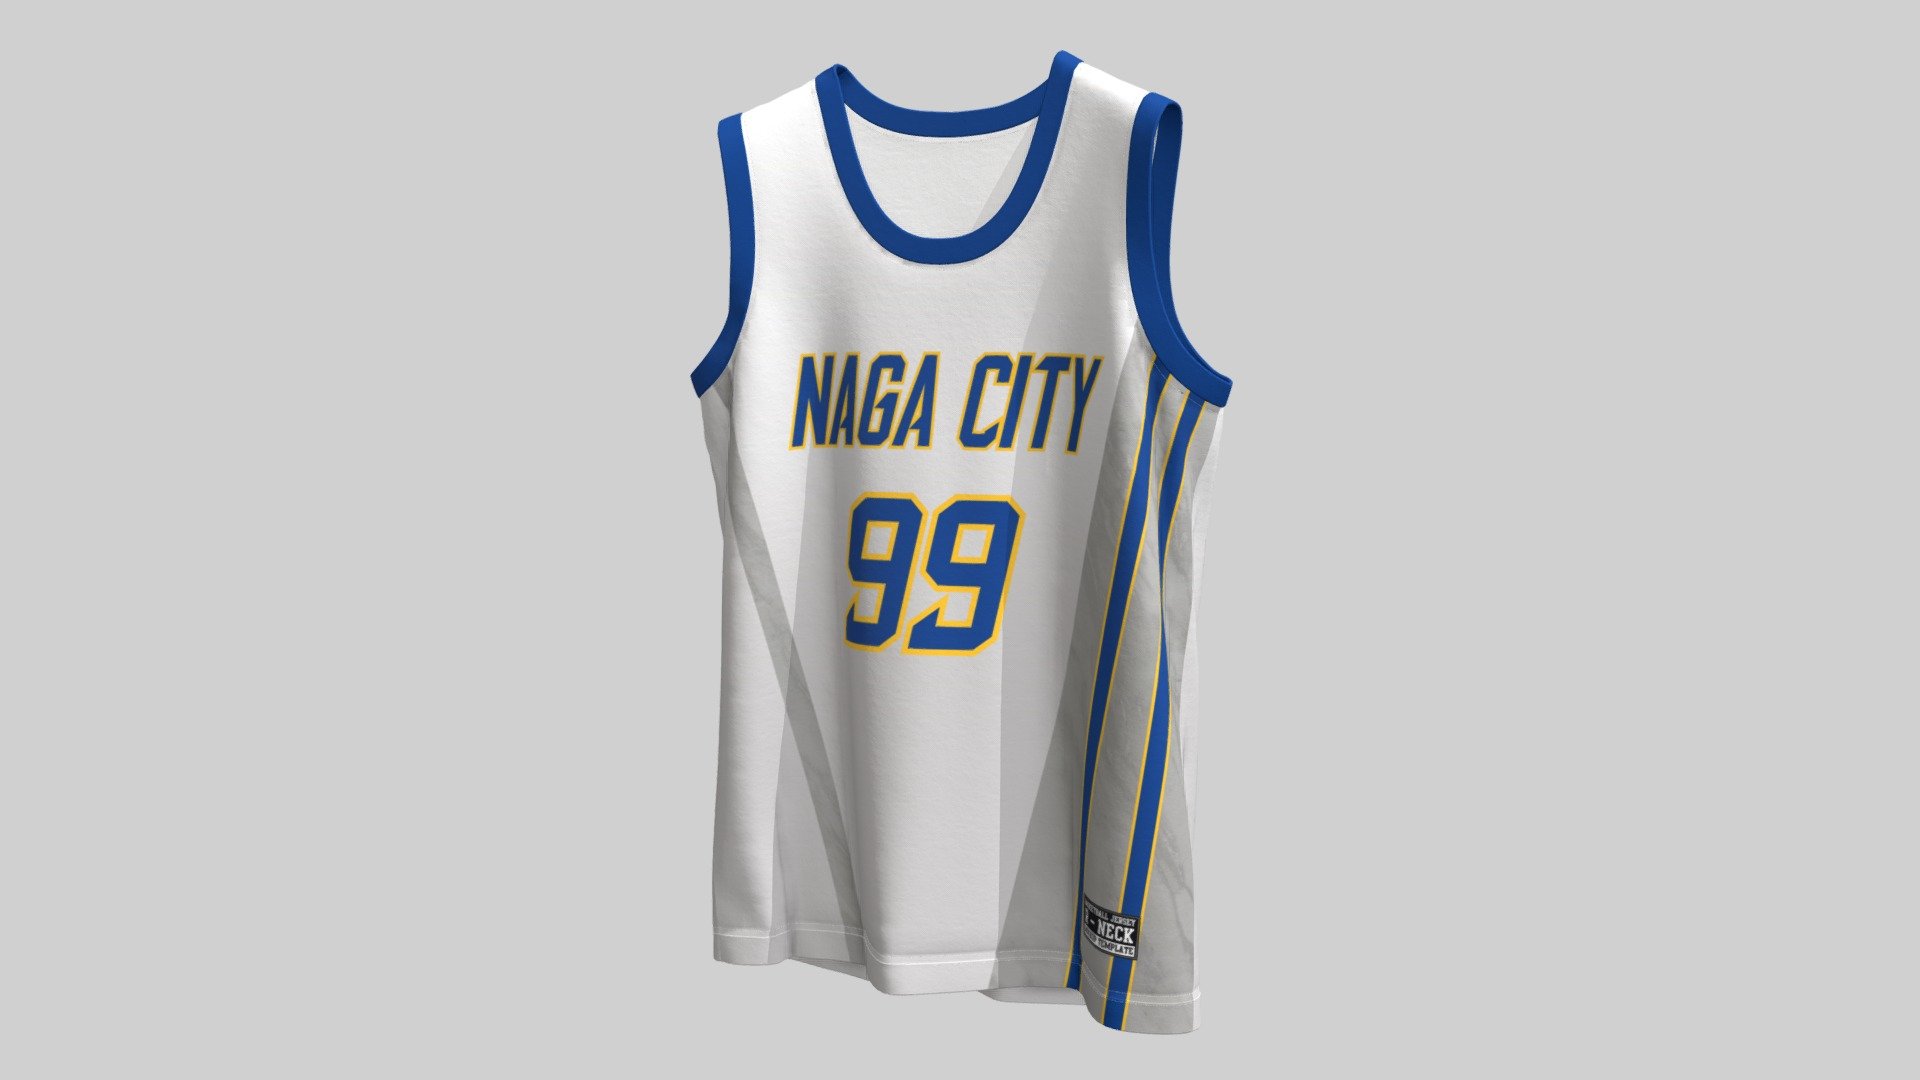 33,678 Basketball Jersey Images, Stock Photos, 3D objects, & Vectors